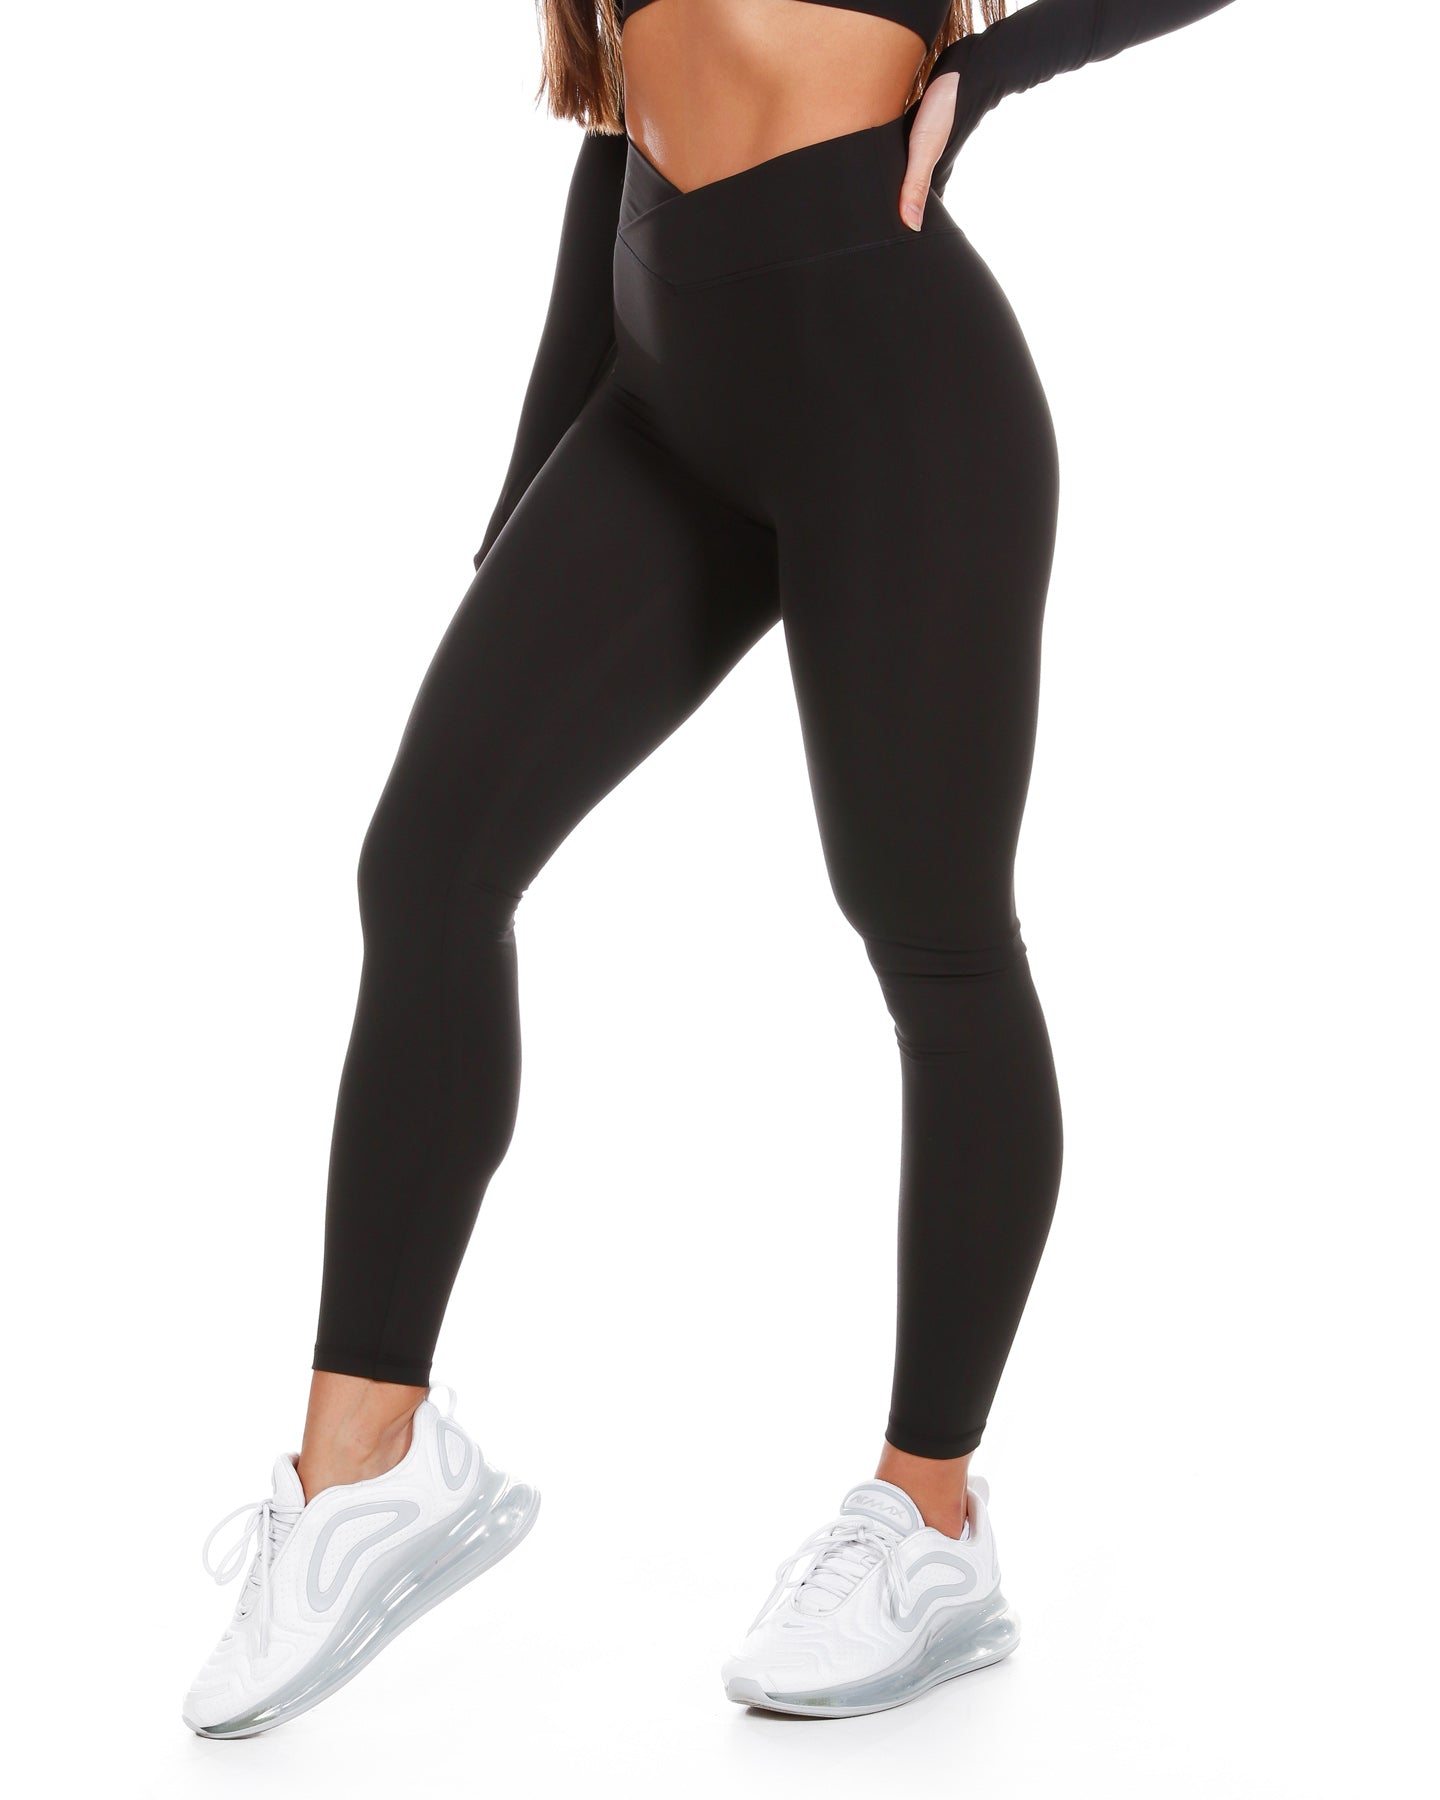 Leggings Seamless Squat Proof 3.0 - Black and green – New Fitness USA